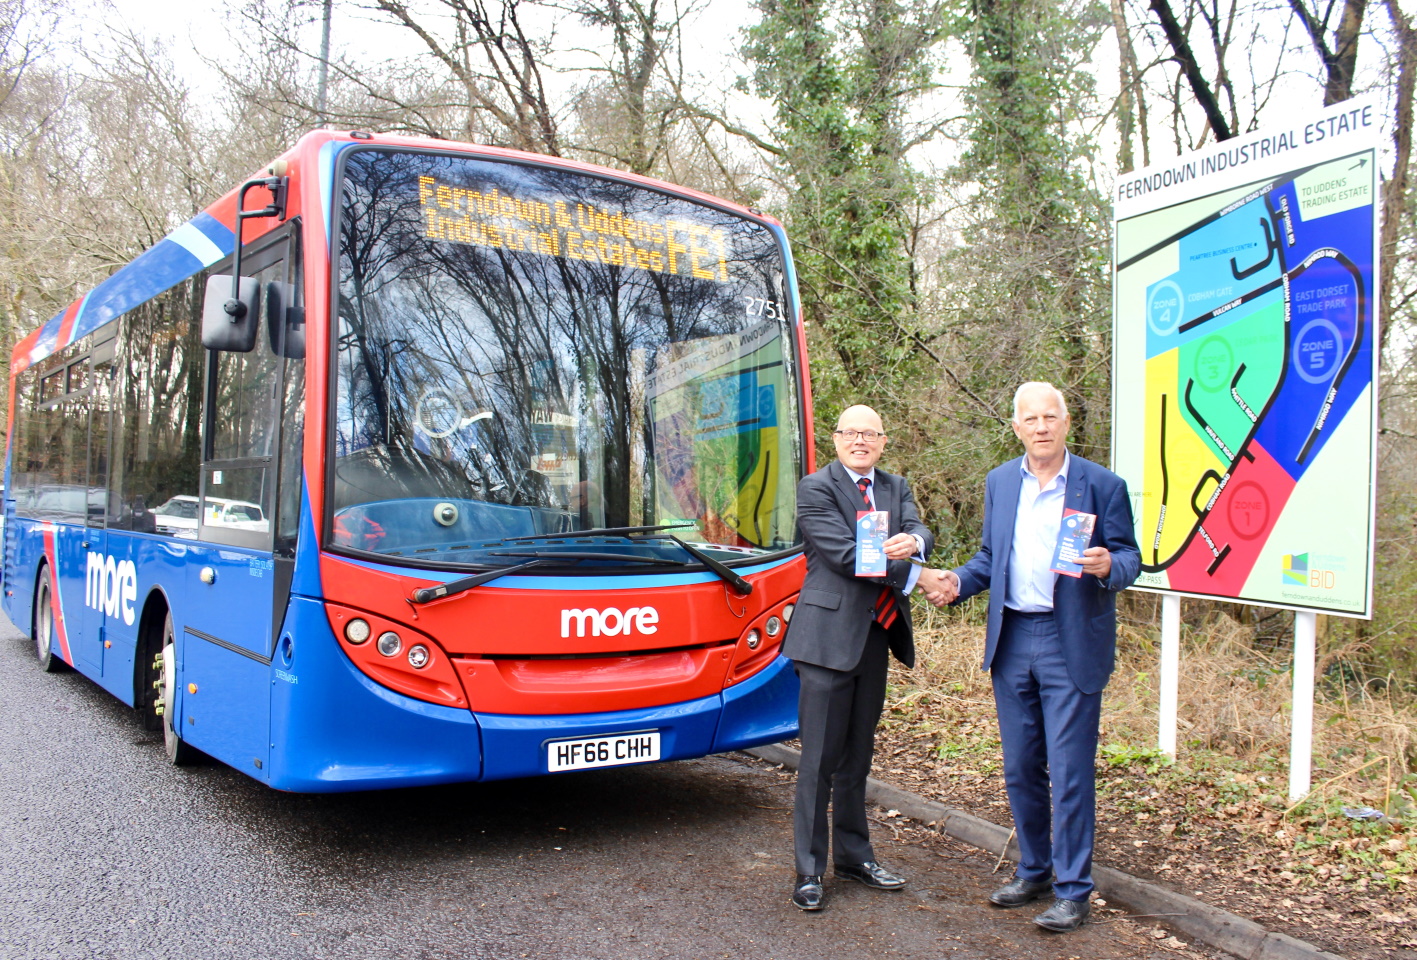 Bus service serving Ferndown and Uddens Industrial Estates re-instated – thanks to local BID partnership with Morebus